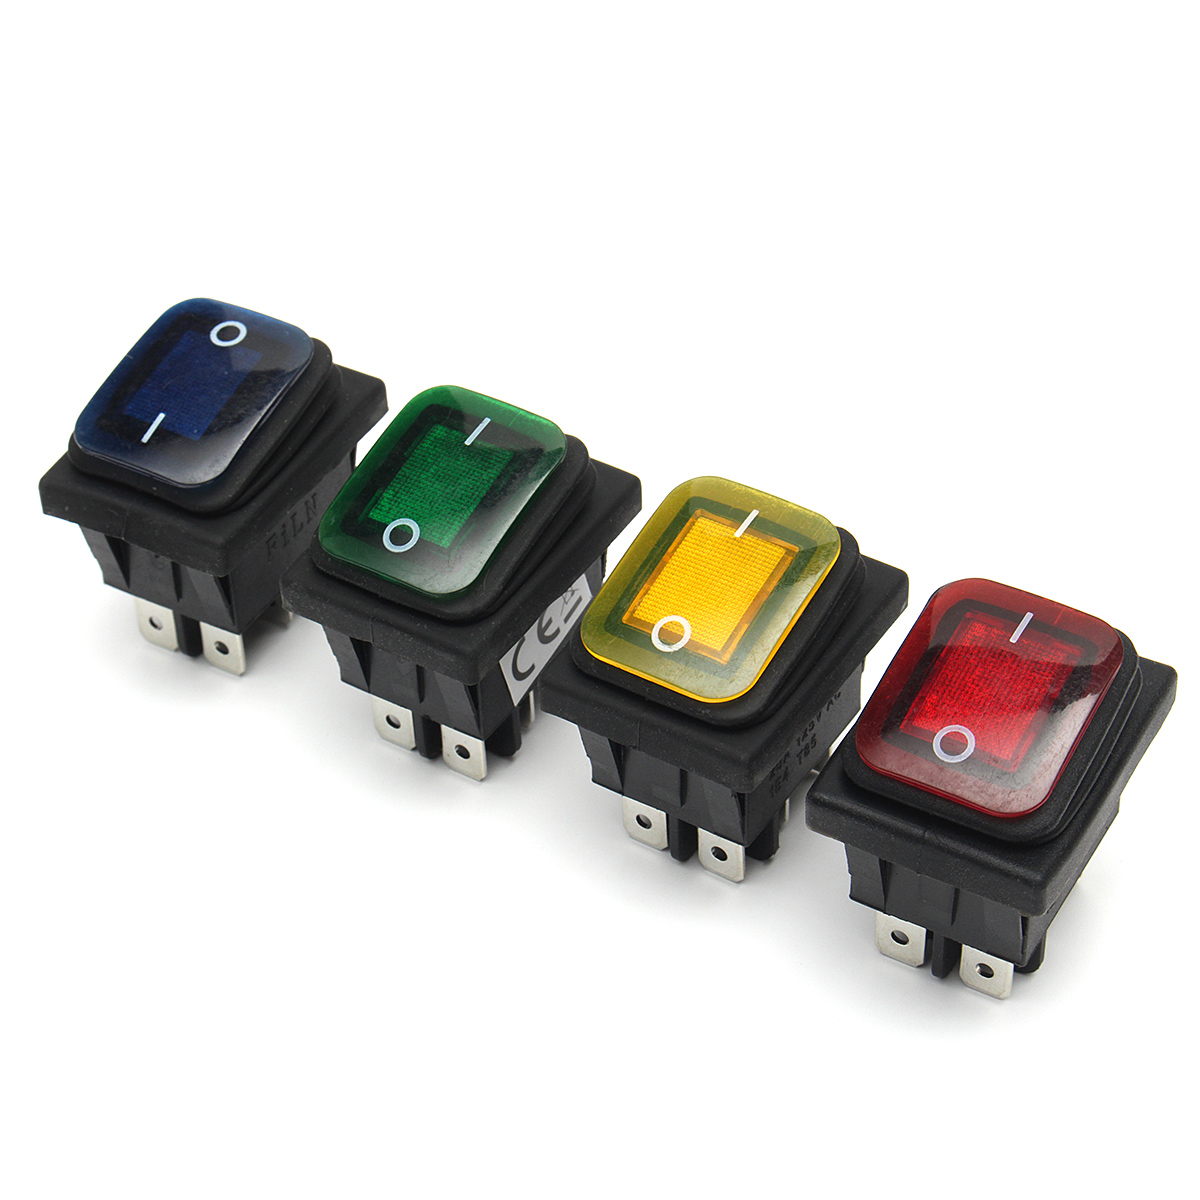 

ON/OFF 12V 16A 6 Pin LED Single Rocker Toggle Switch Waterproof SPST For Car Boat